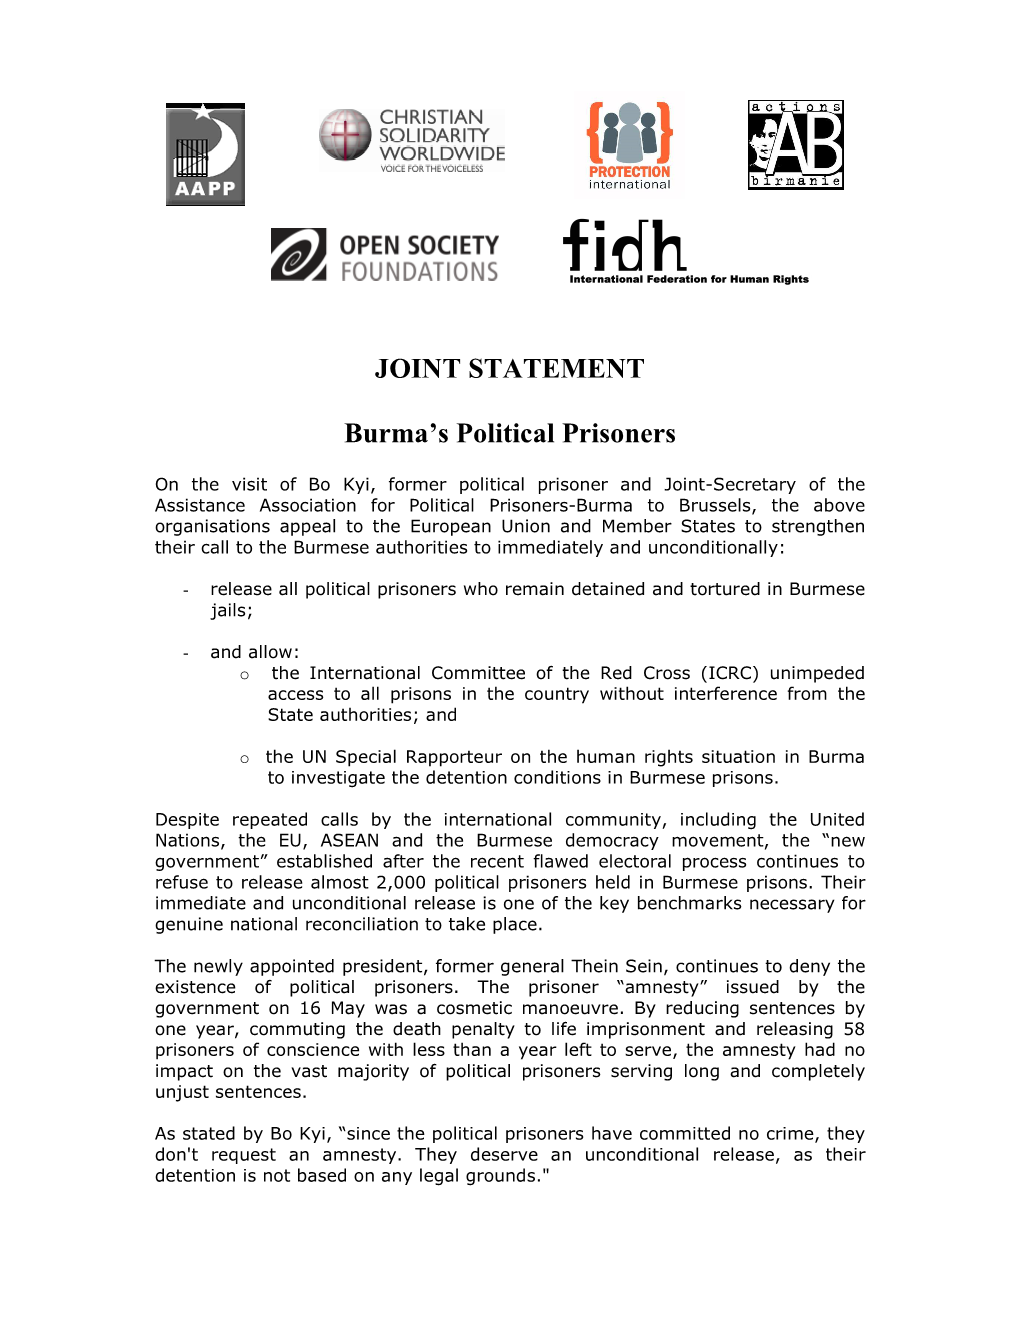 Joint Statement on Burma's Political Prisoners